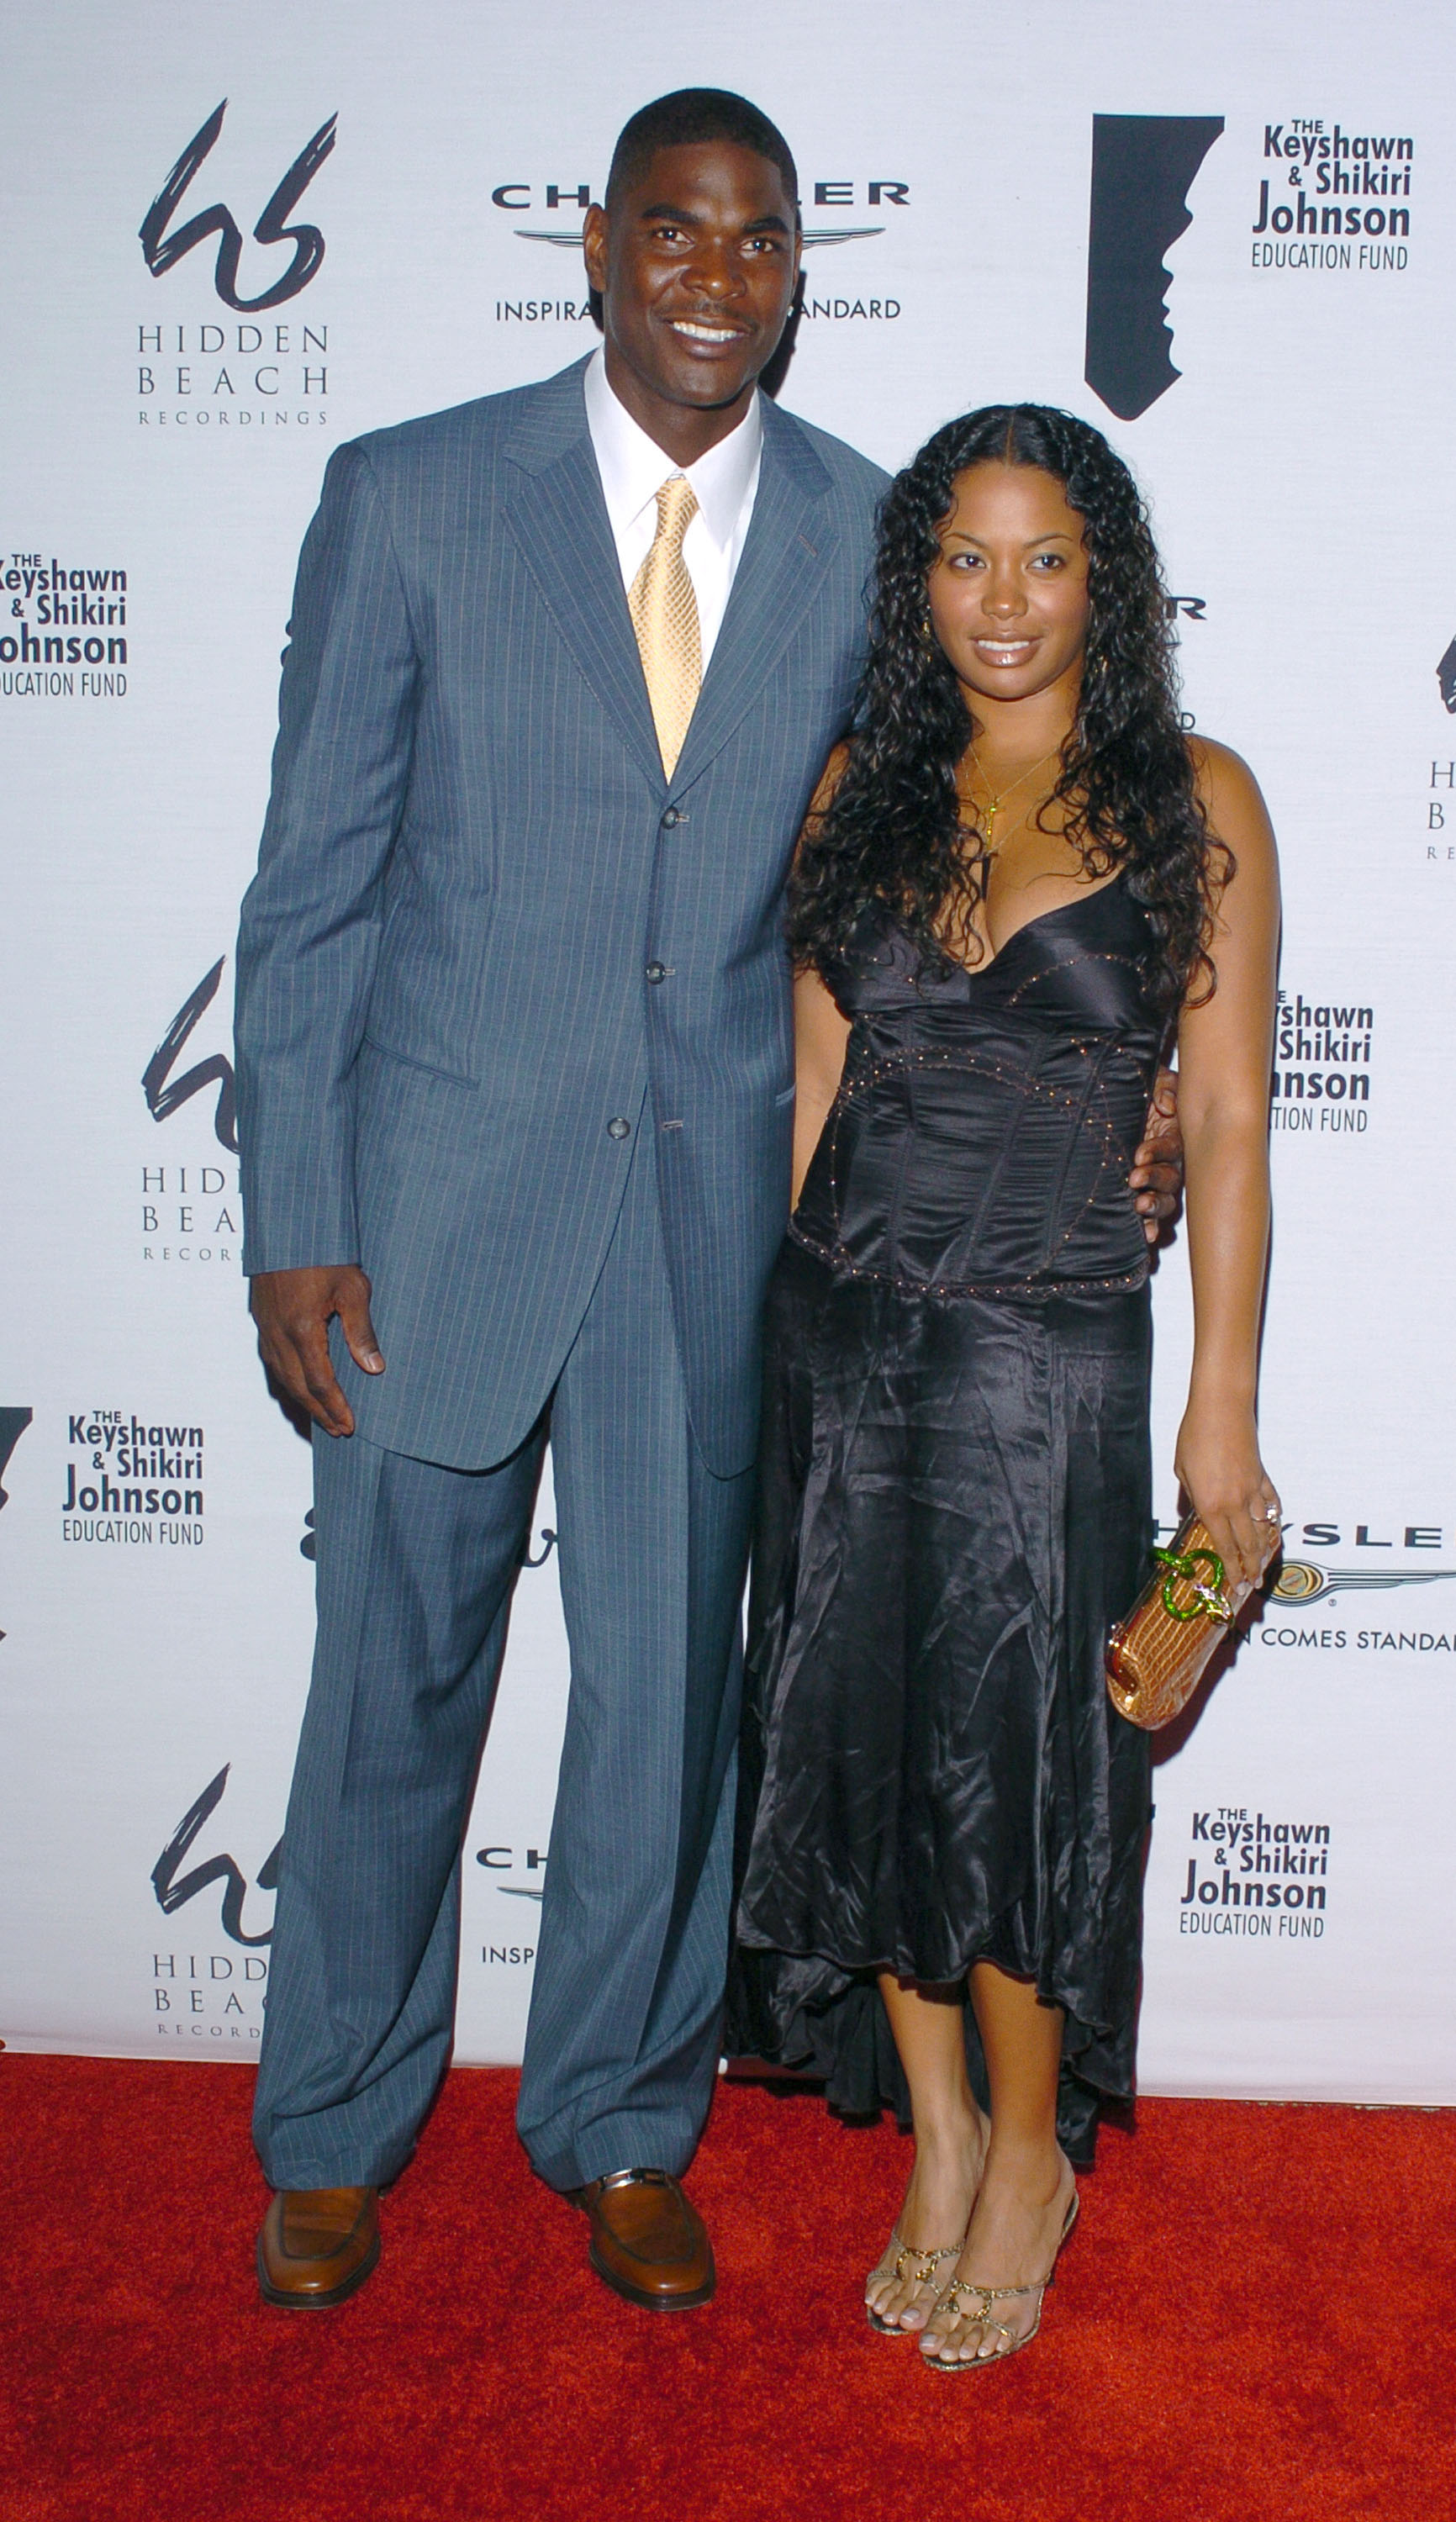 Keyshawn Johnson and Shikiri Hightower during Benefit for The Keyshawn & Shikiri Johnson Education Fund at Esquire House on October 4, 2004 in Beverly Hills, California. | Sources: Getty Images